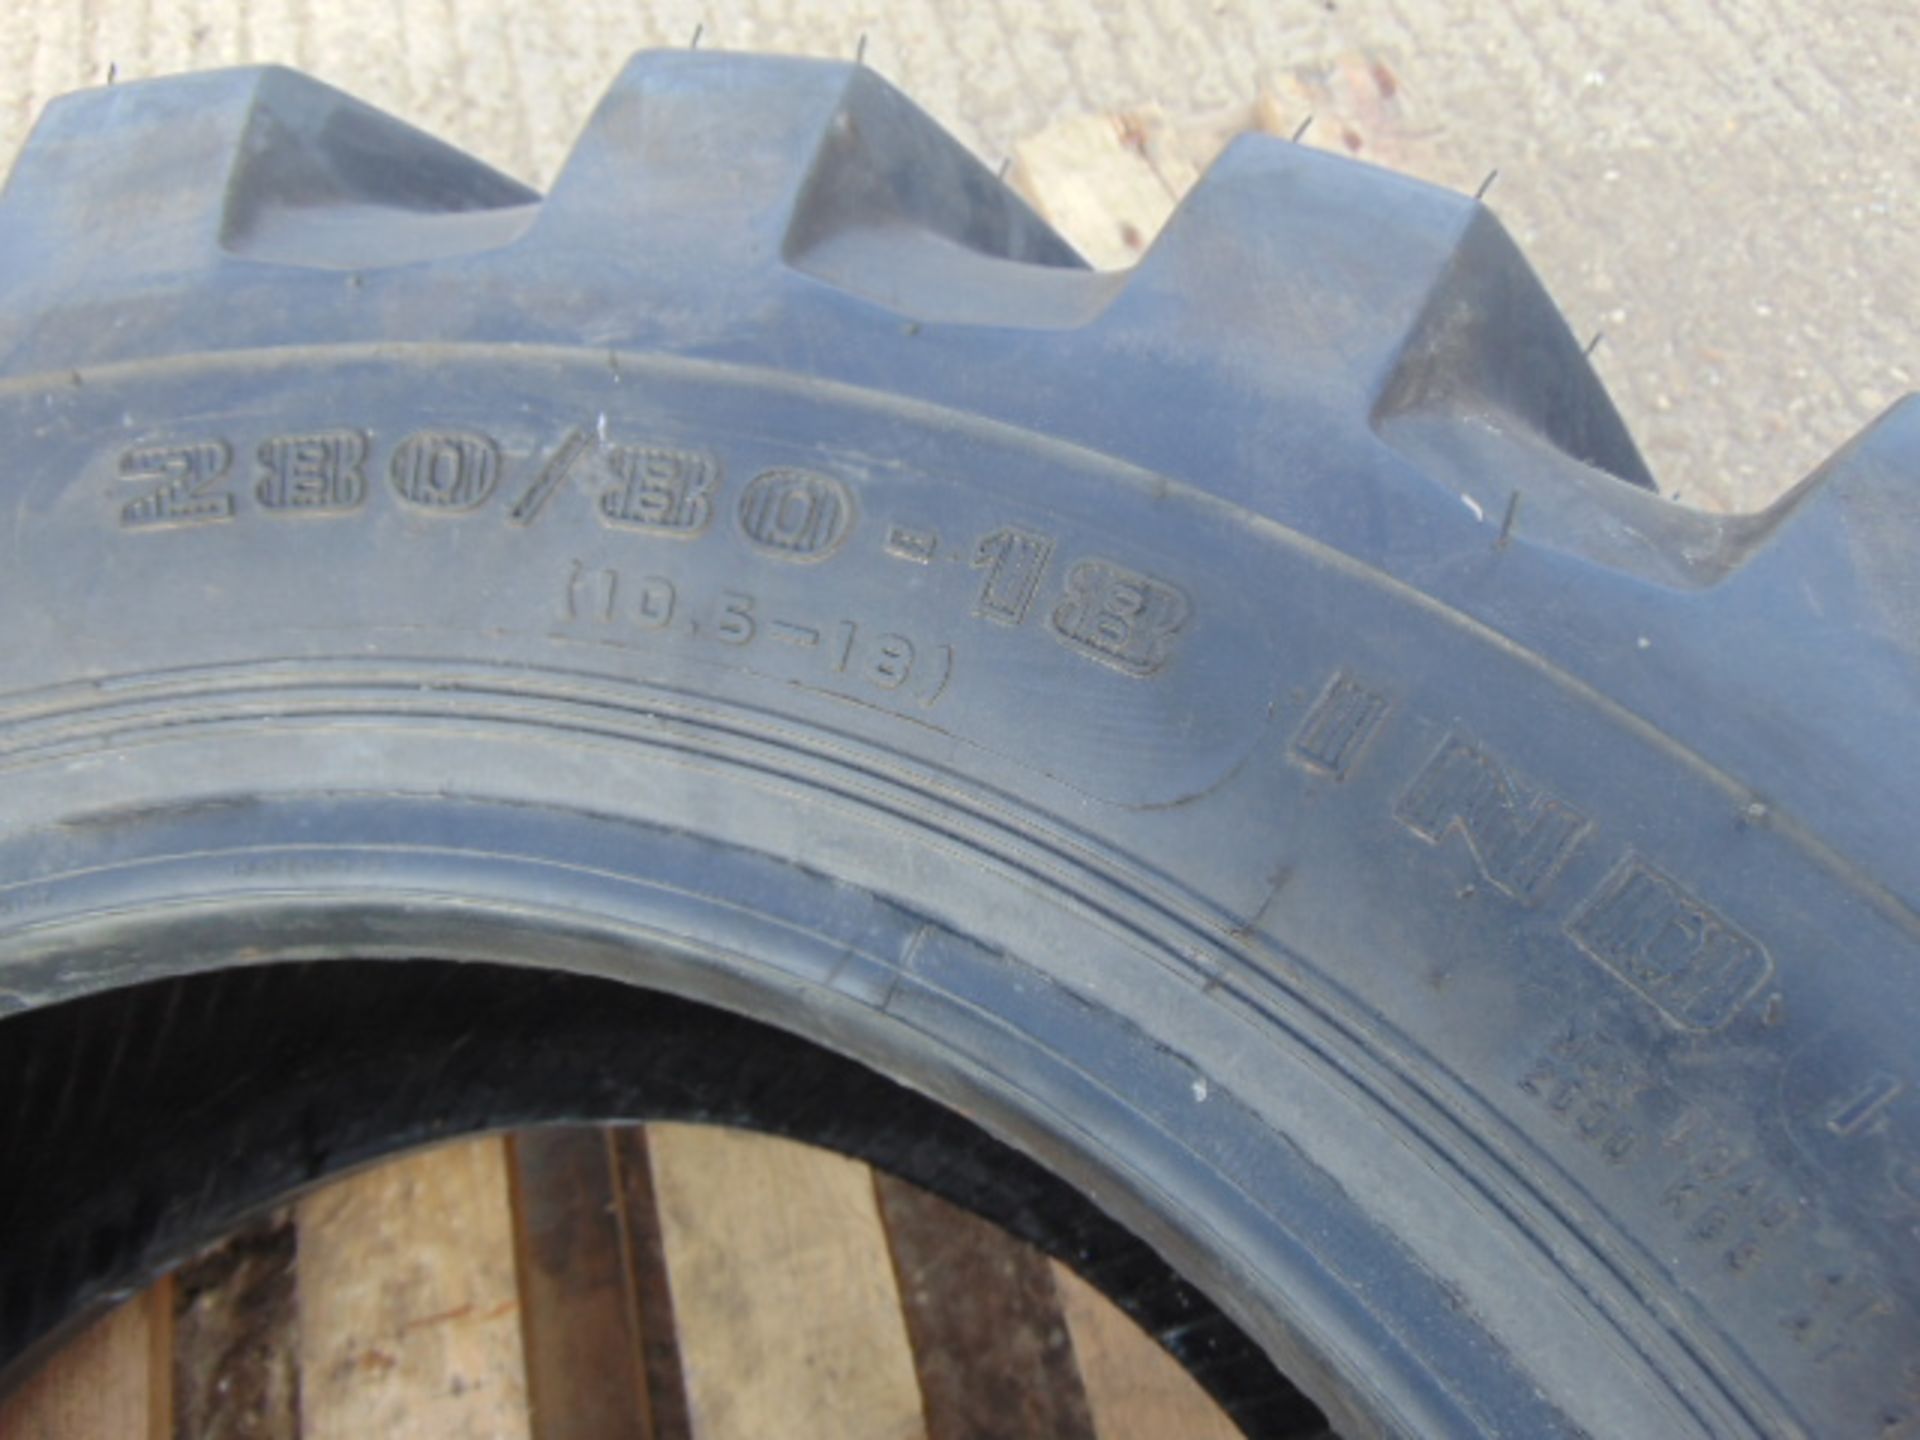 1 x Firestone Super Traction Loader 280/80-18 Tyre - Image 6 of 6